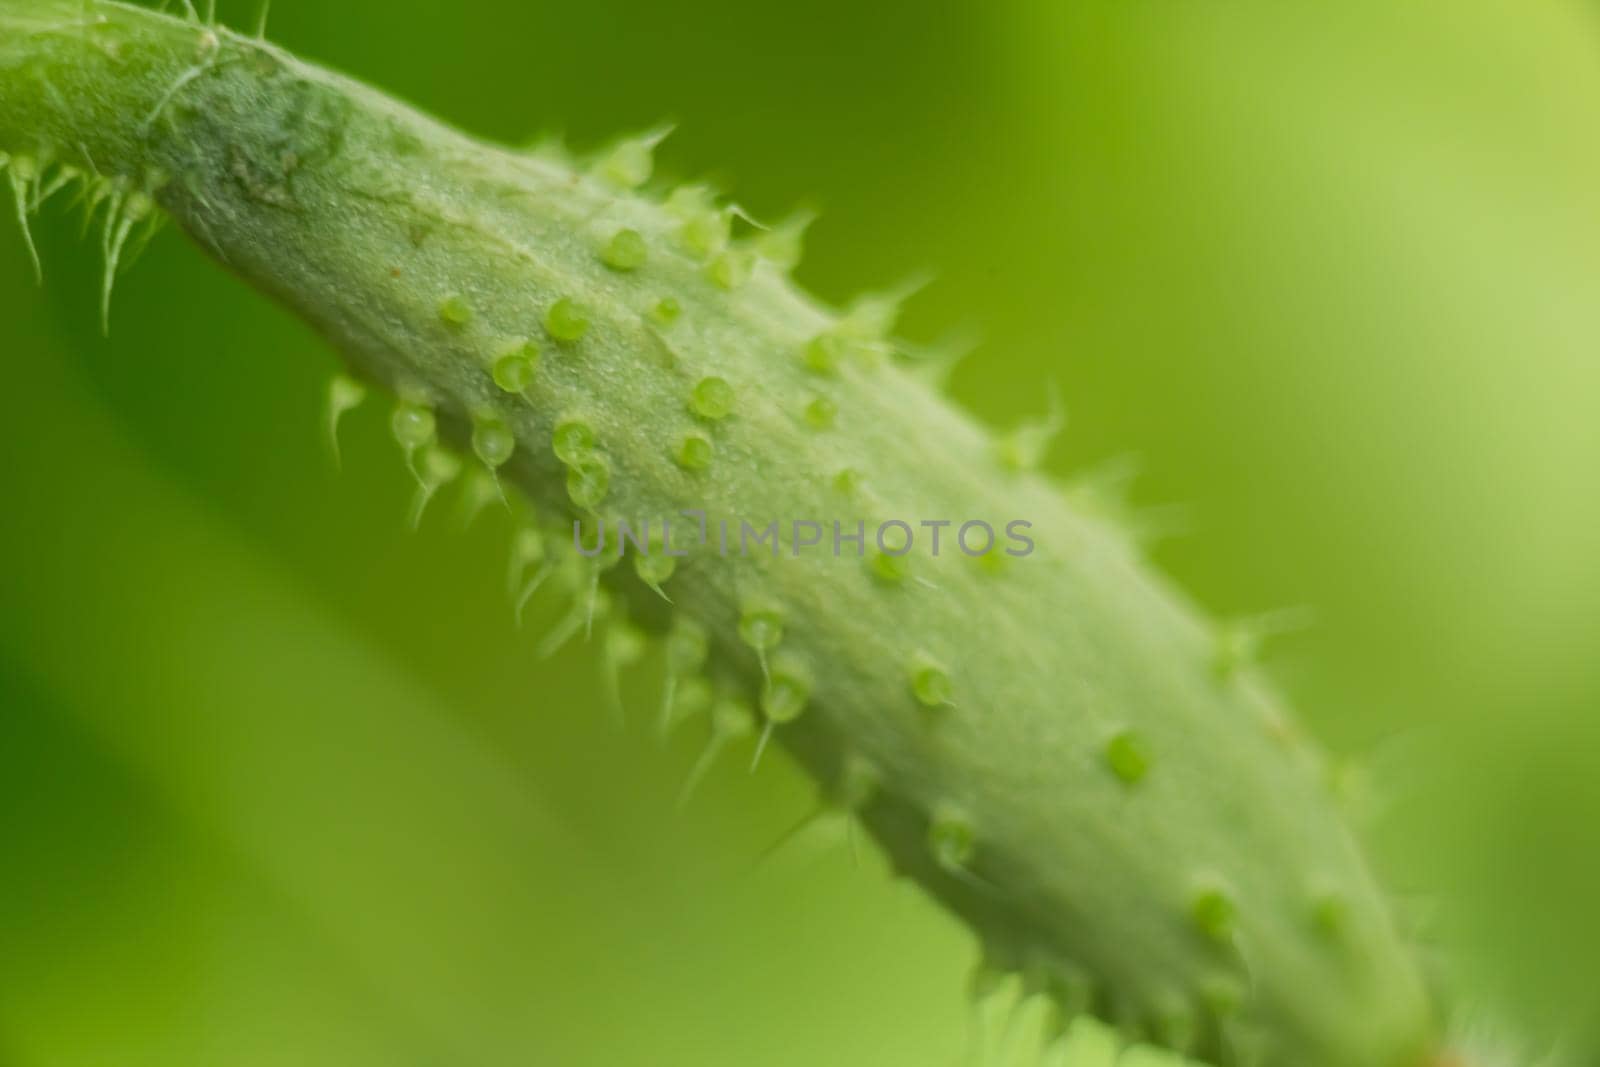 Small green cucumber in a greenhouse, macro photo, shallow depth of field. Harvesting autumn vegetables. Healthy food concept, vegetarian diet of raw fresh food. Non-GMO organic food.